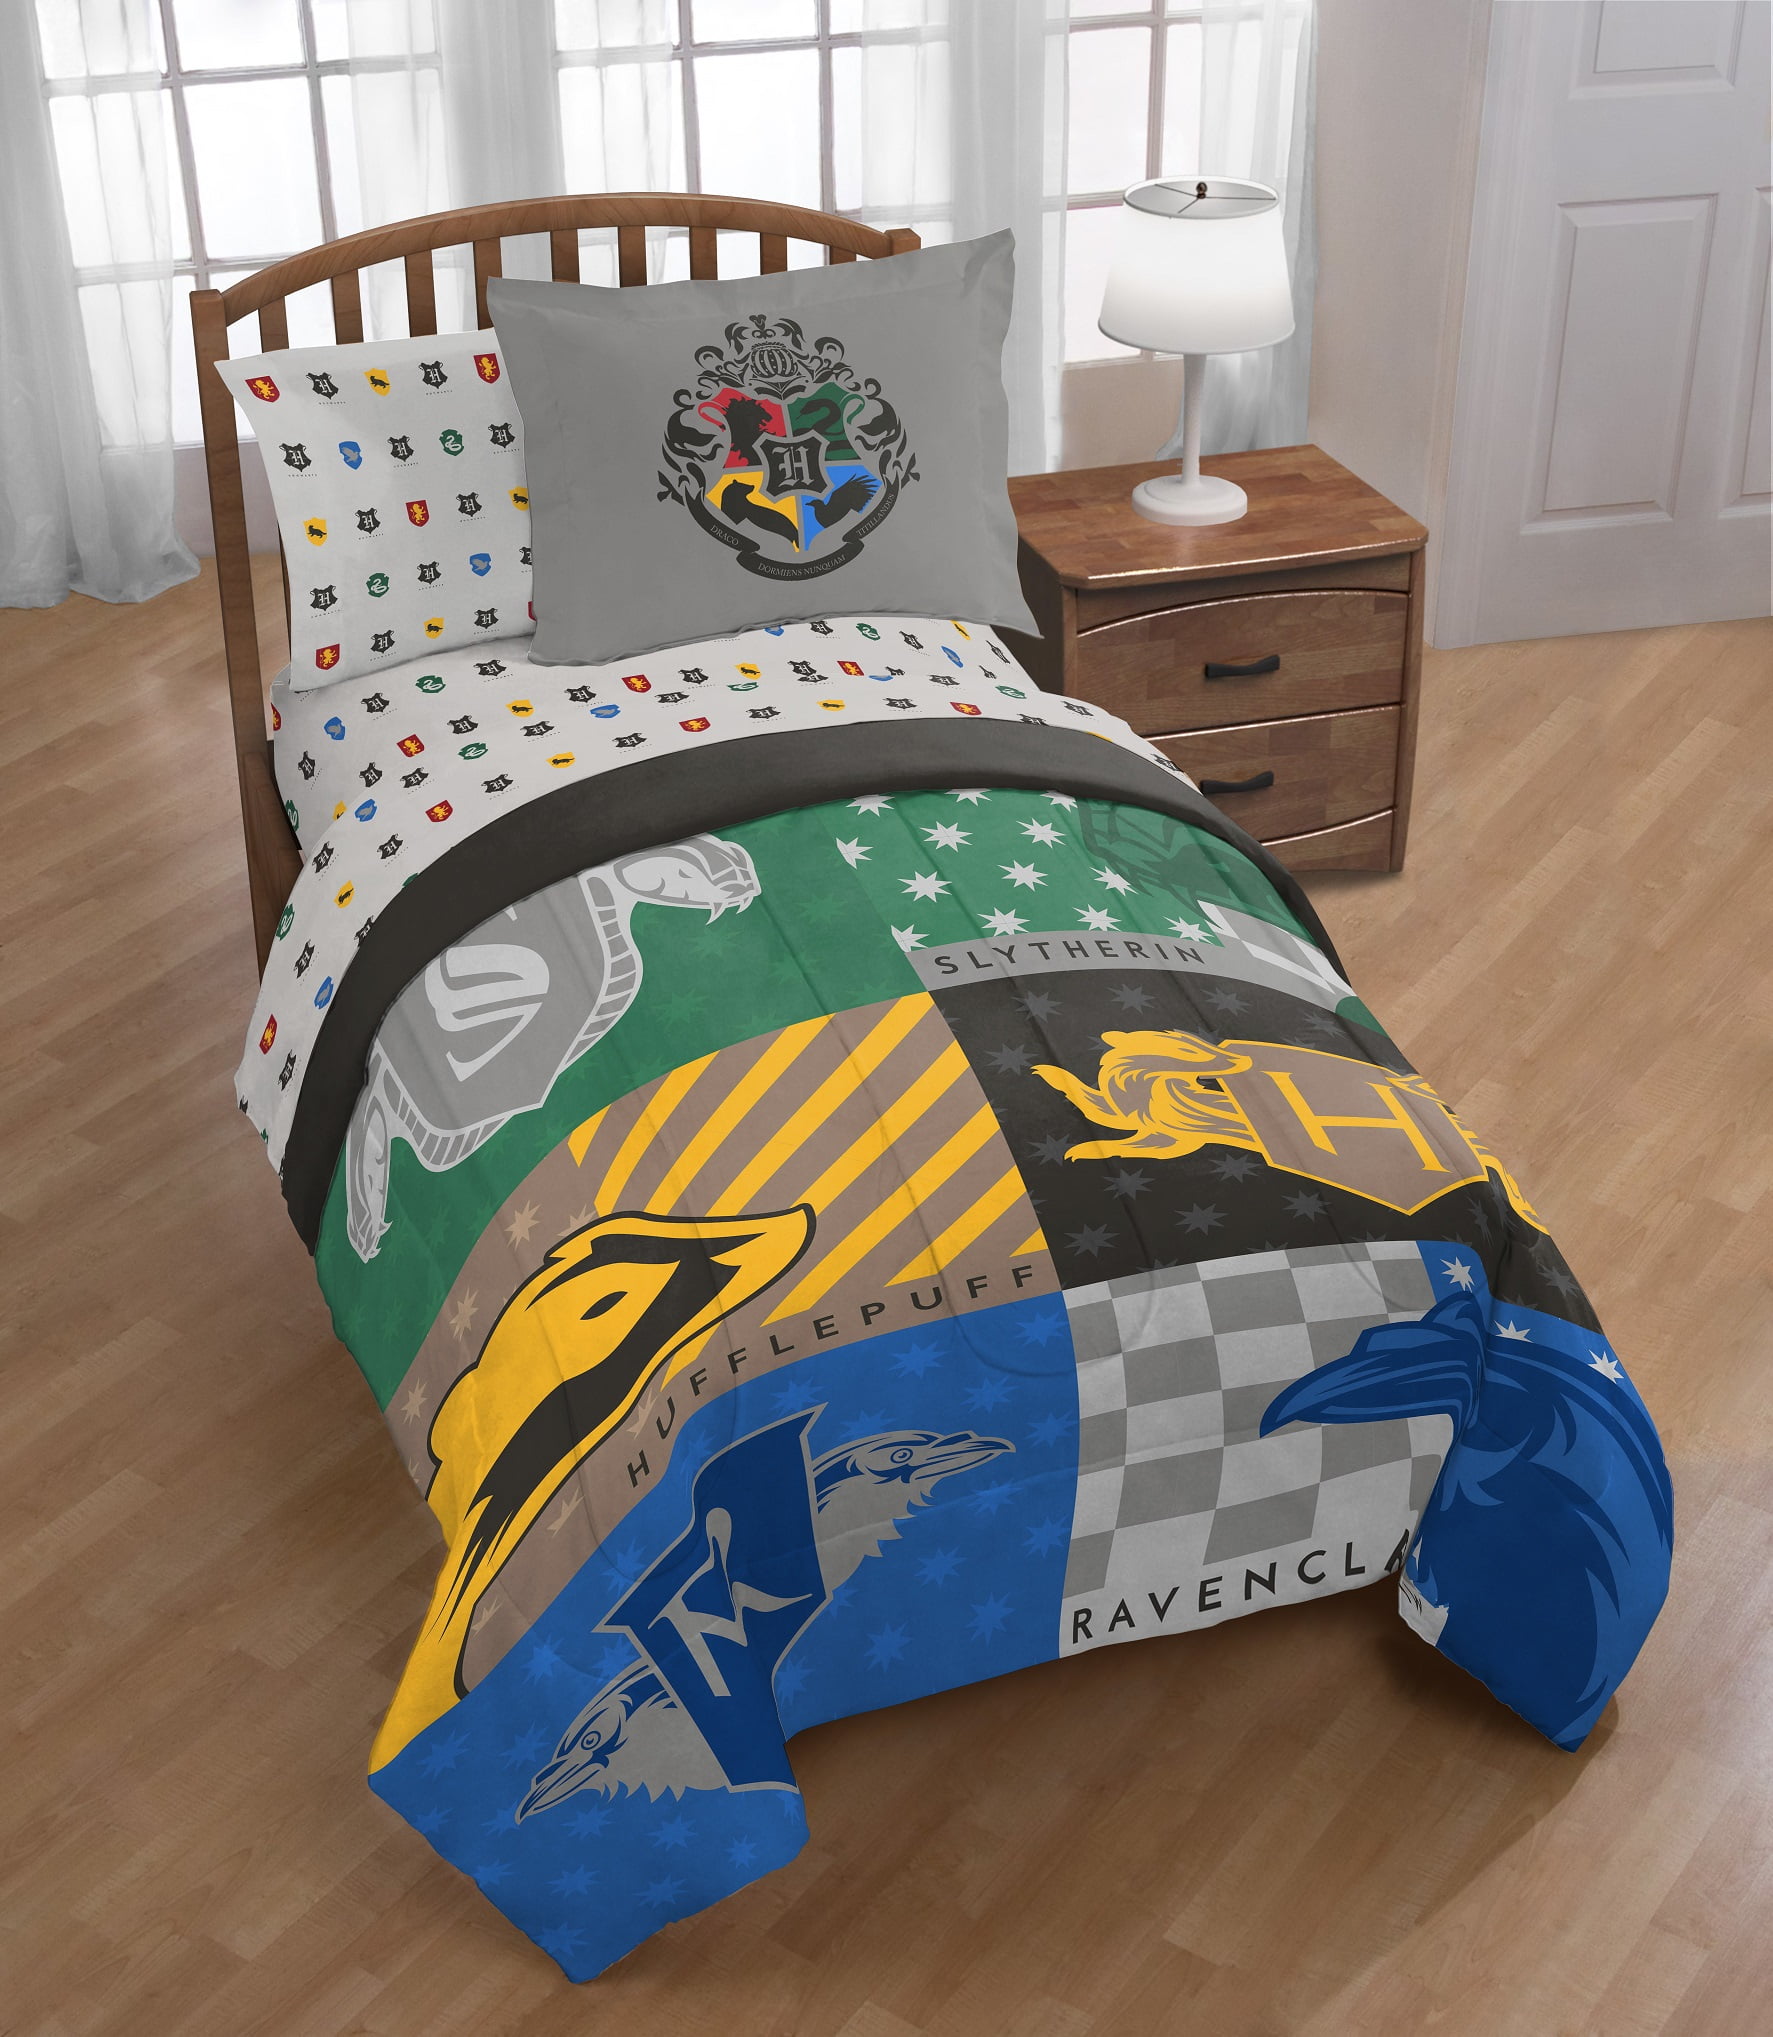 Plush Throw or Blanket New Choice of Harry Potter Bedding Twin Sheet Set 